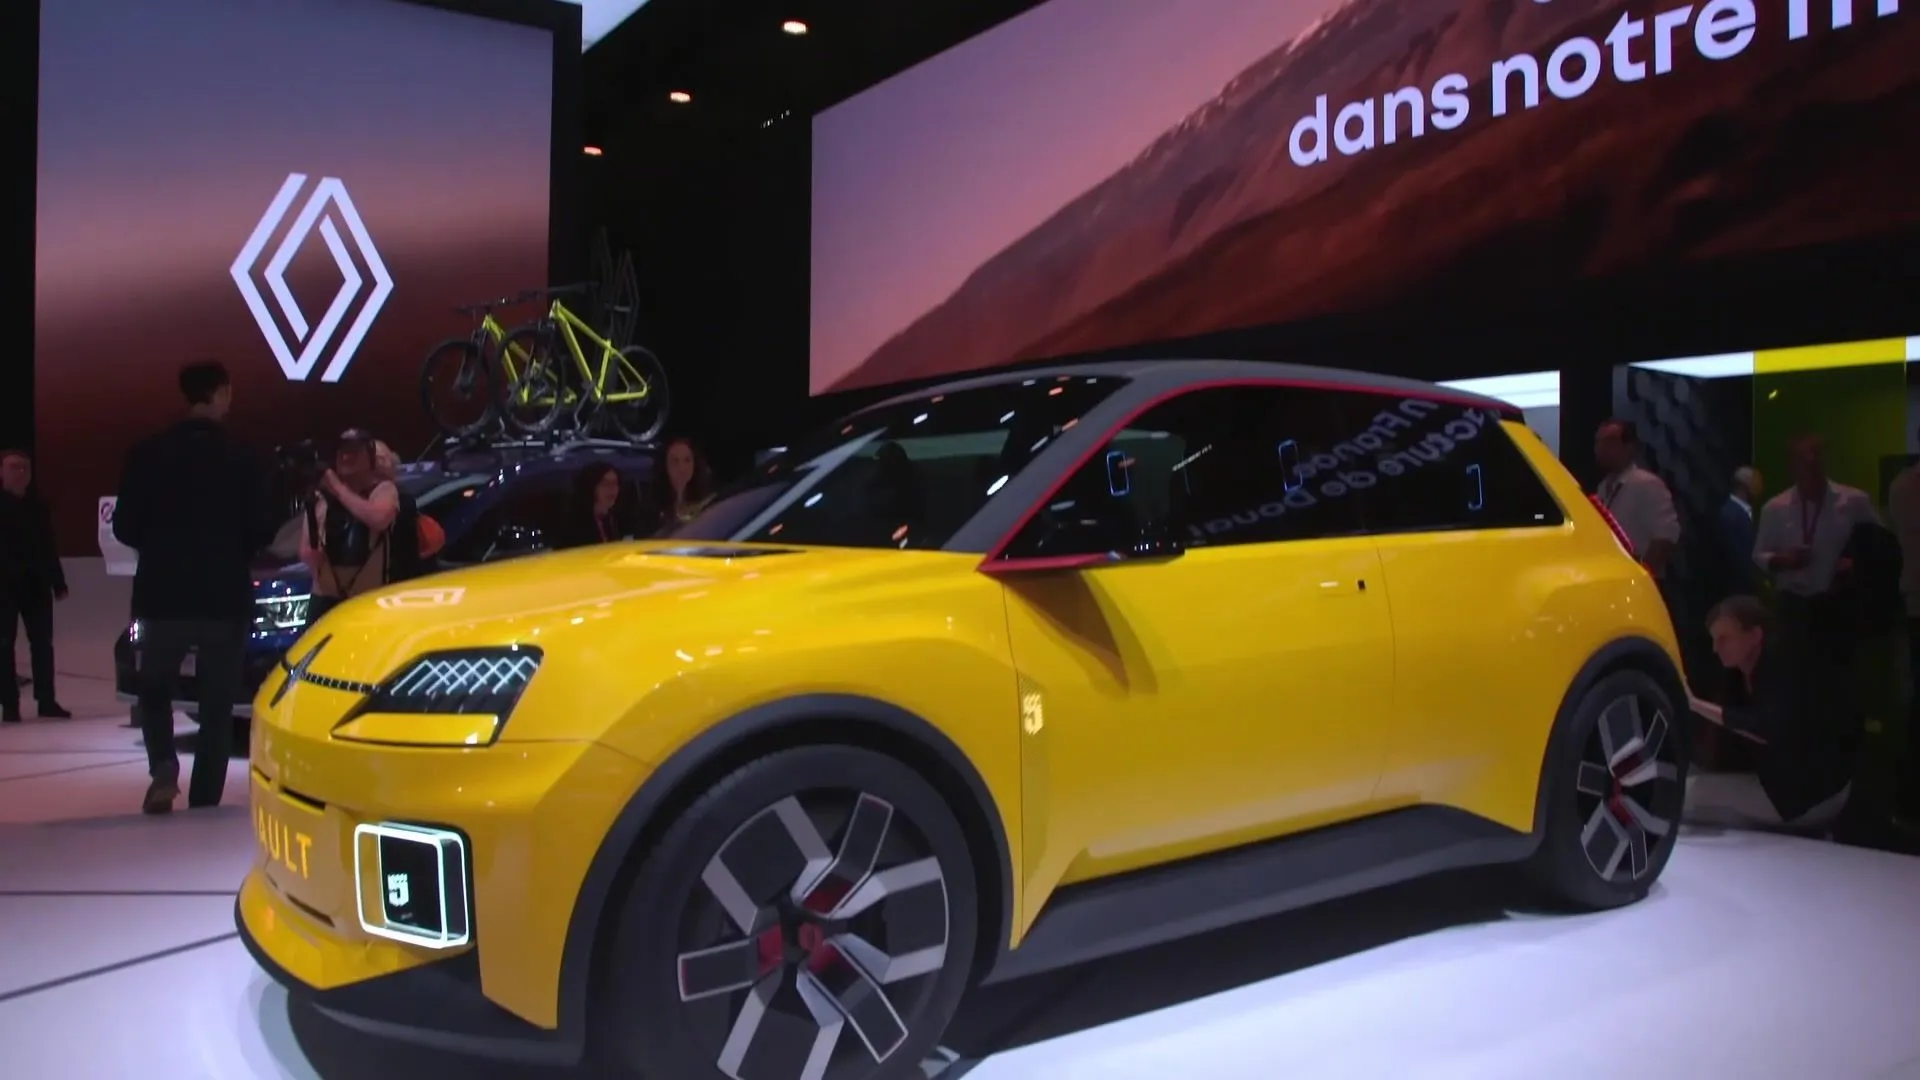 The new Renault 5 Prototype at the 2022 Paris Motor Show